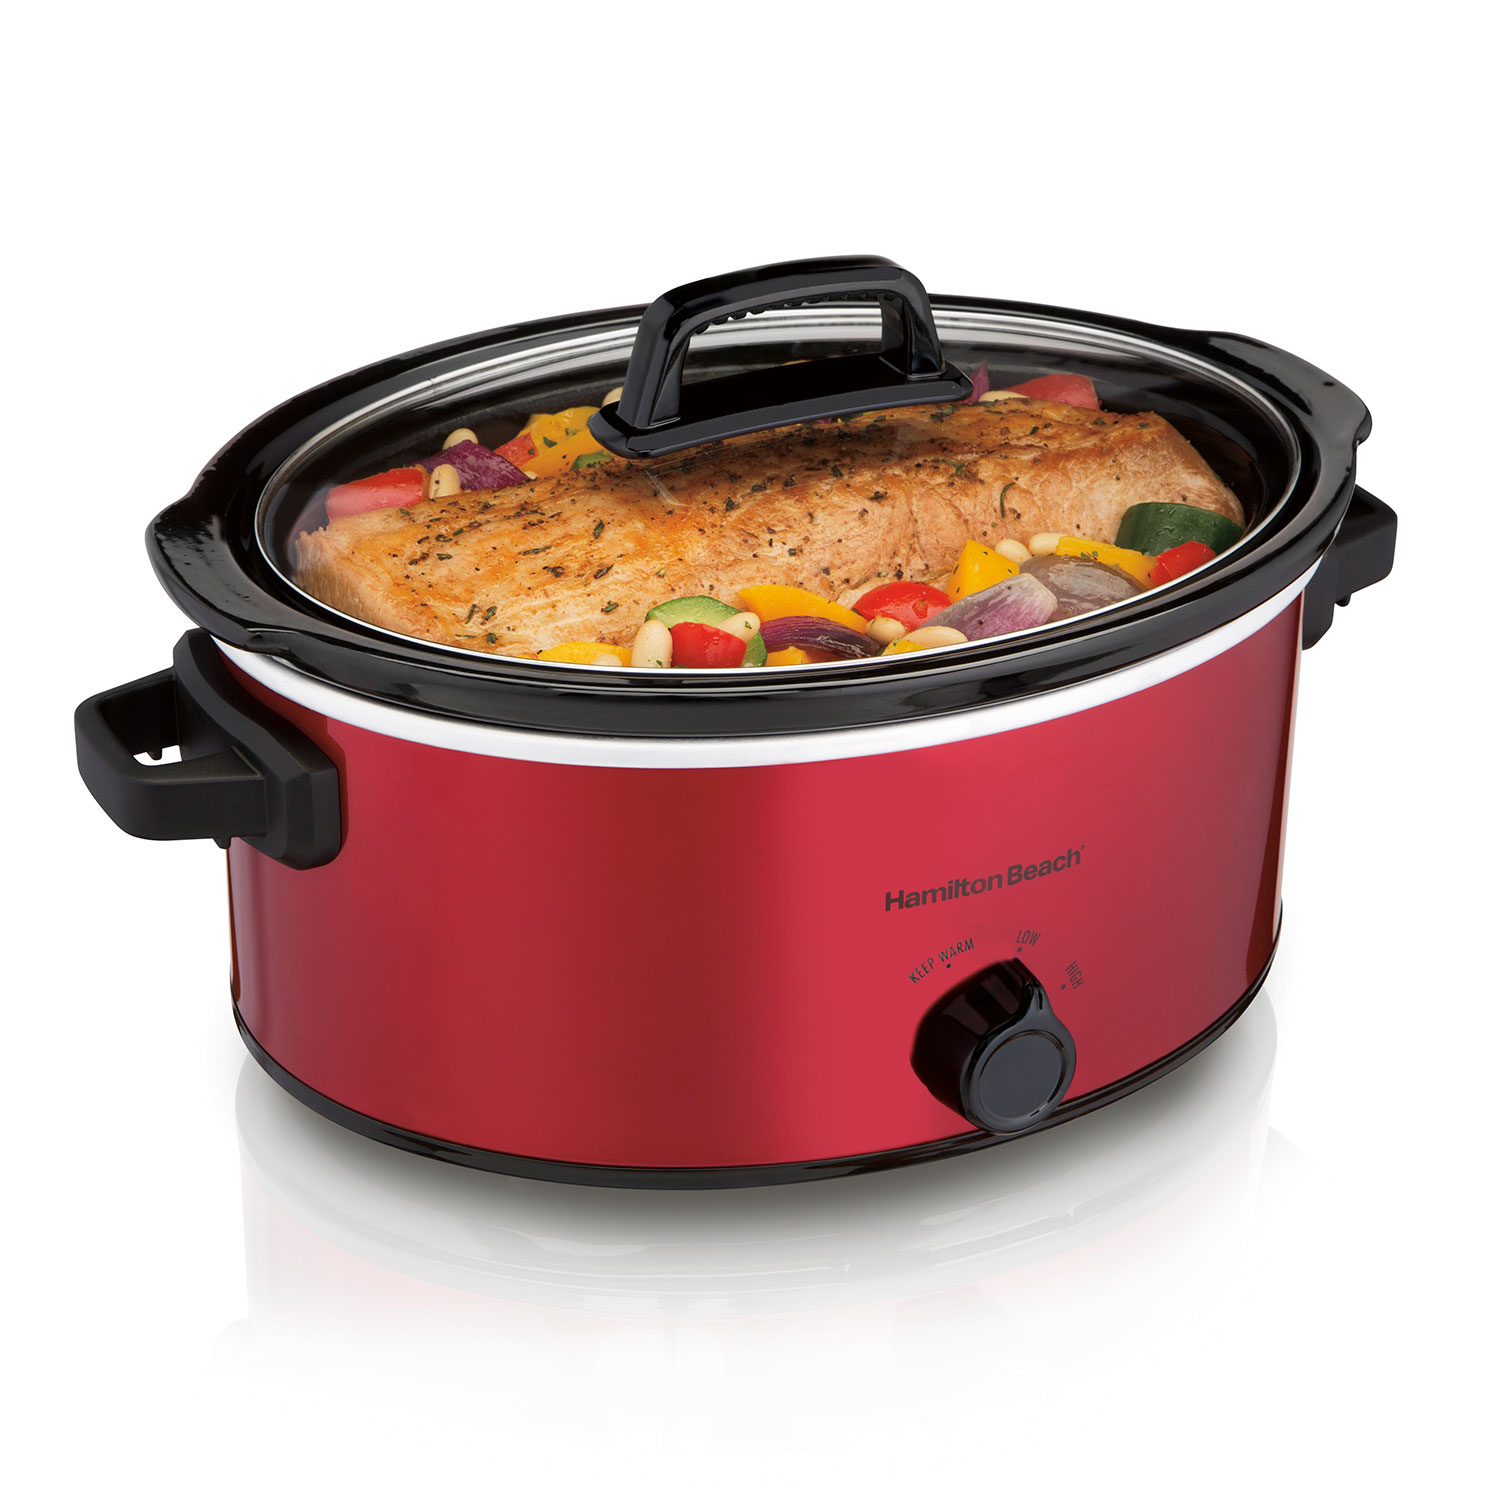 6 Quart Oval Slow Cooker, Red (33666)